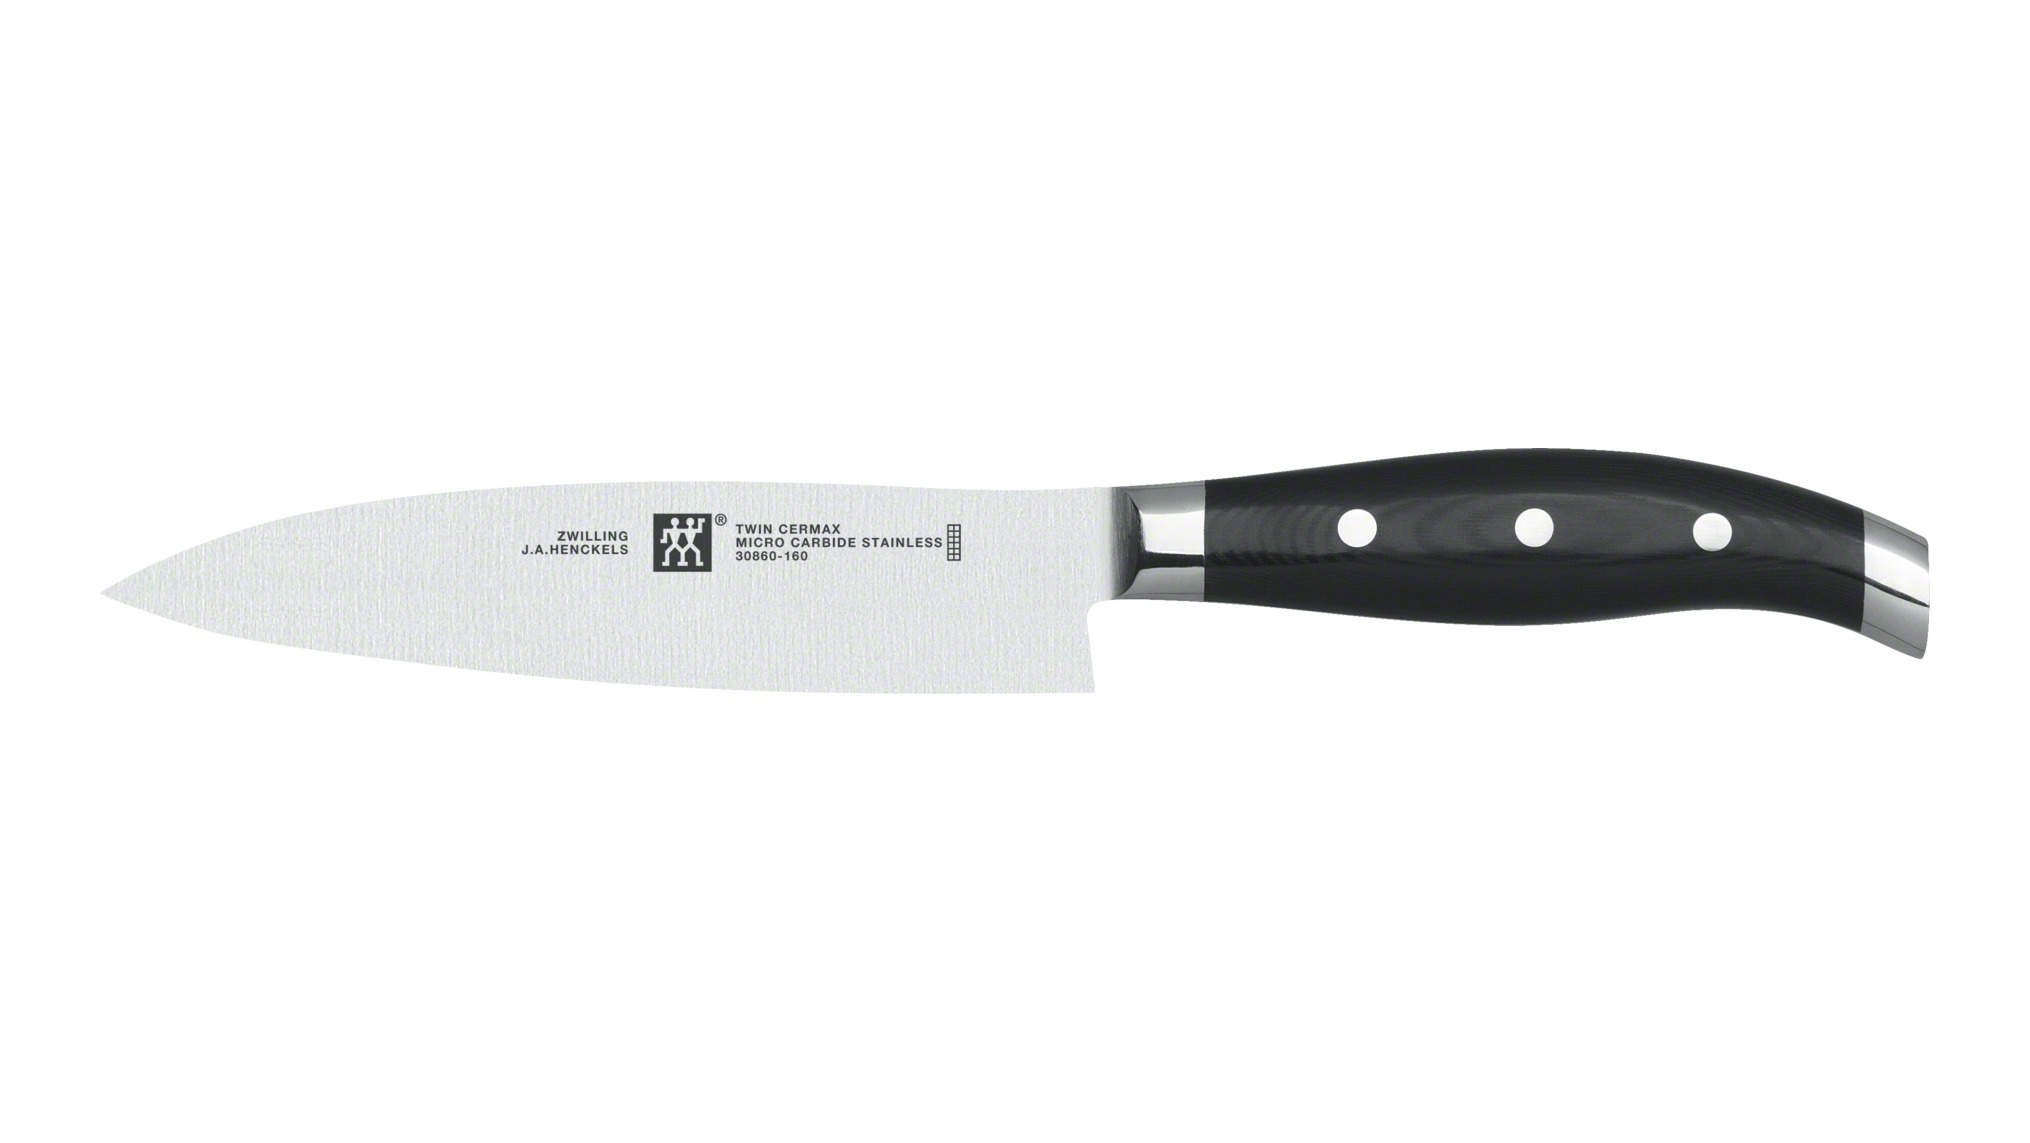 ZWILLING Twin Cermax